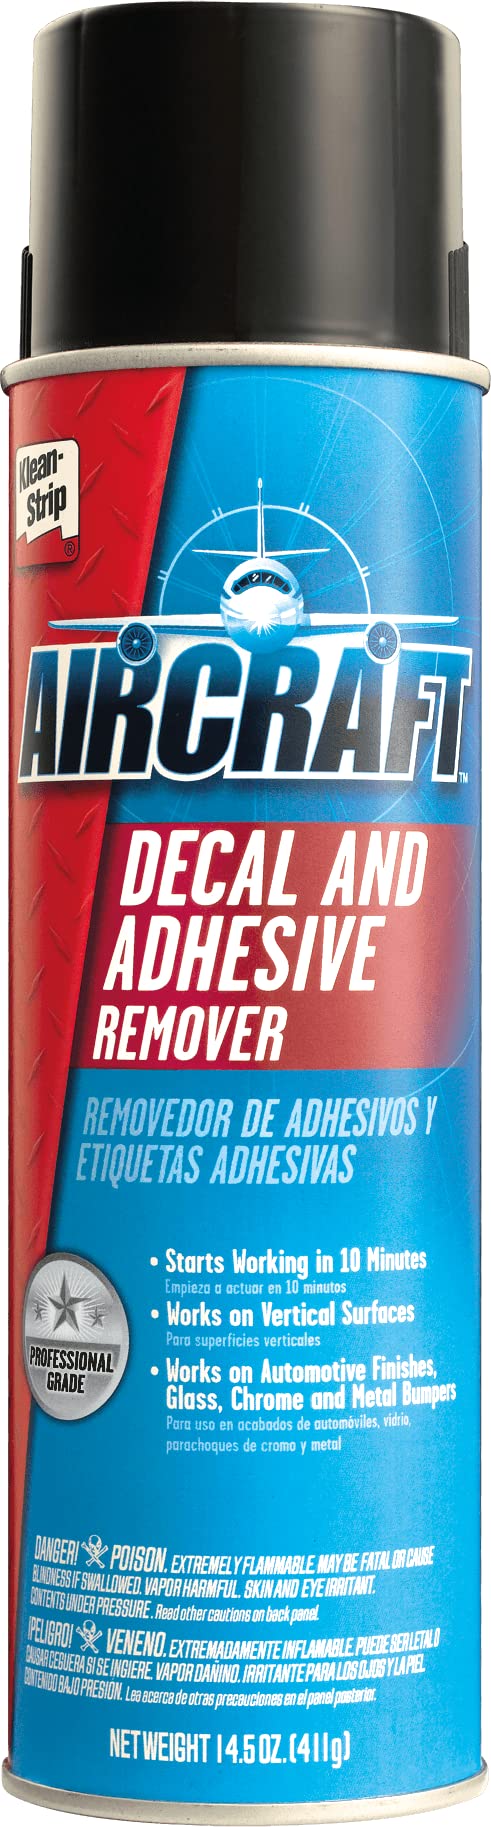 *LOW VOC* DECALS AND ADHESIVE REMOVER 15oz spray